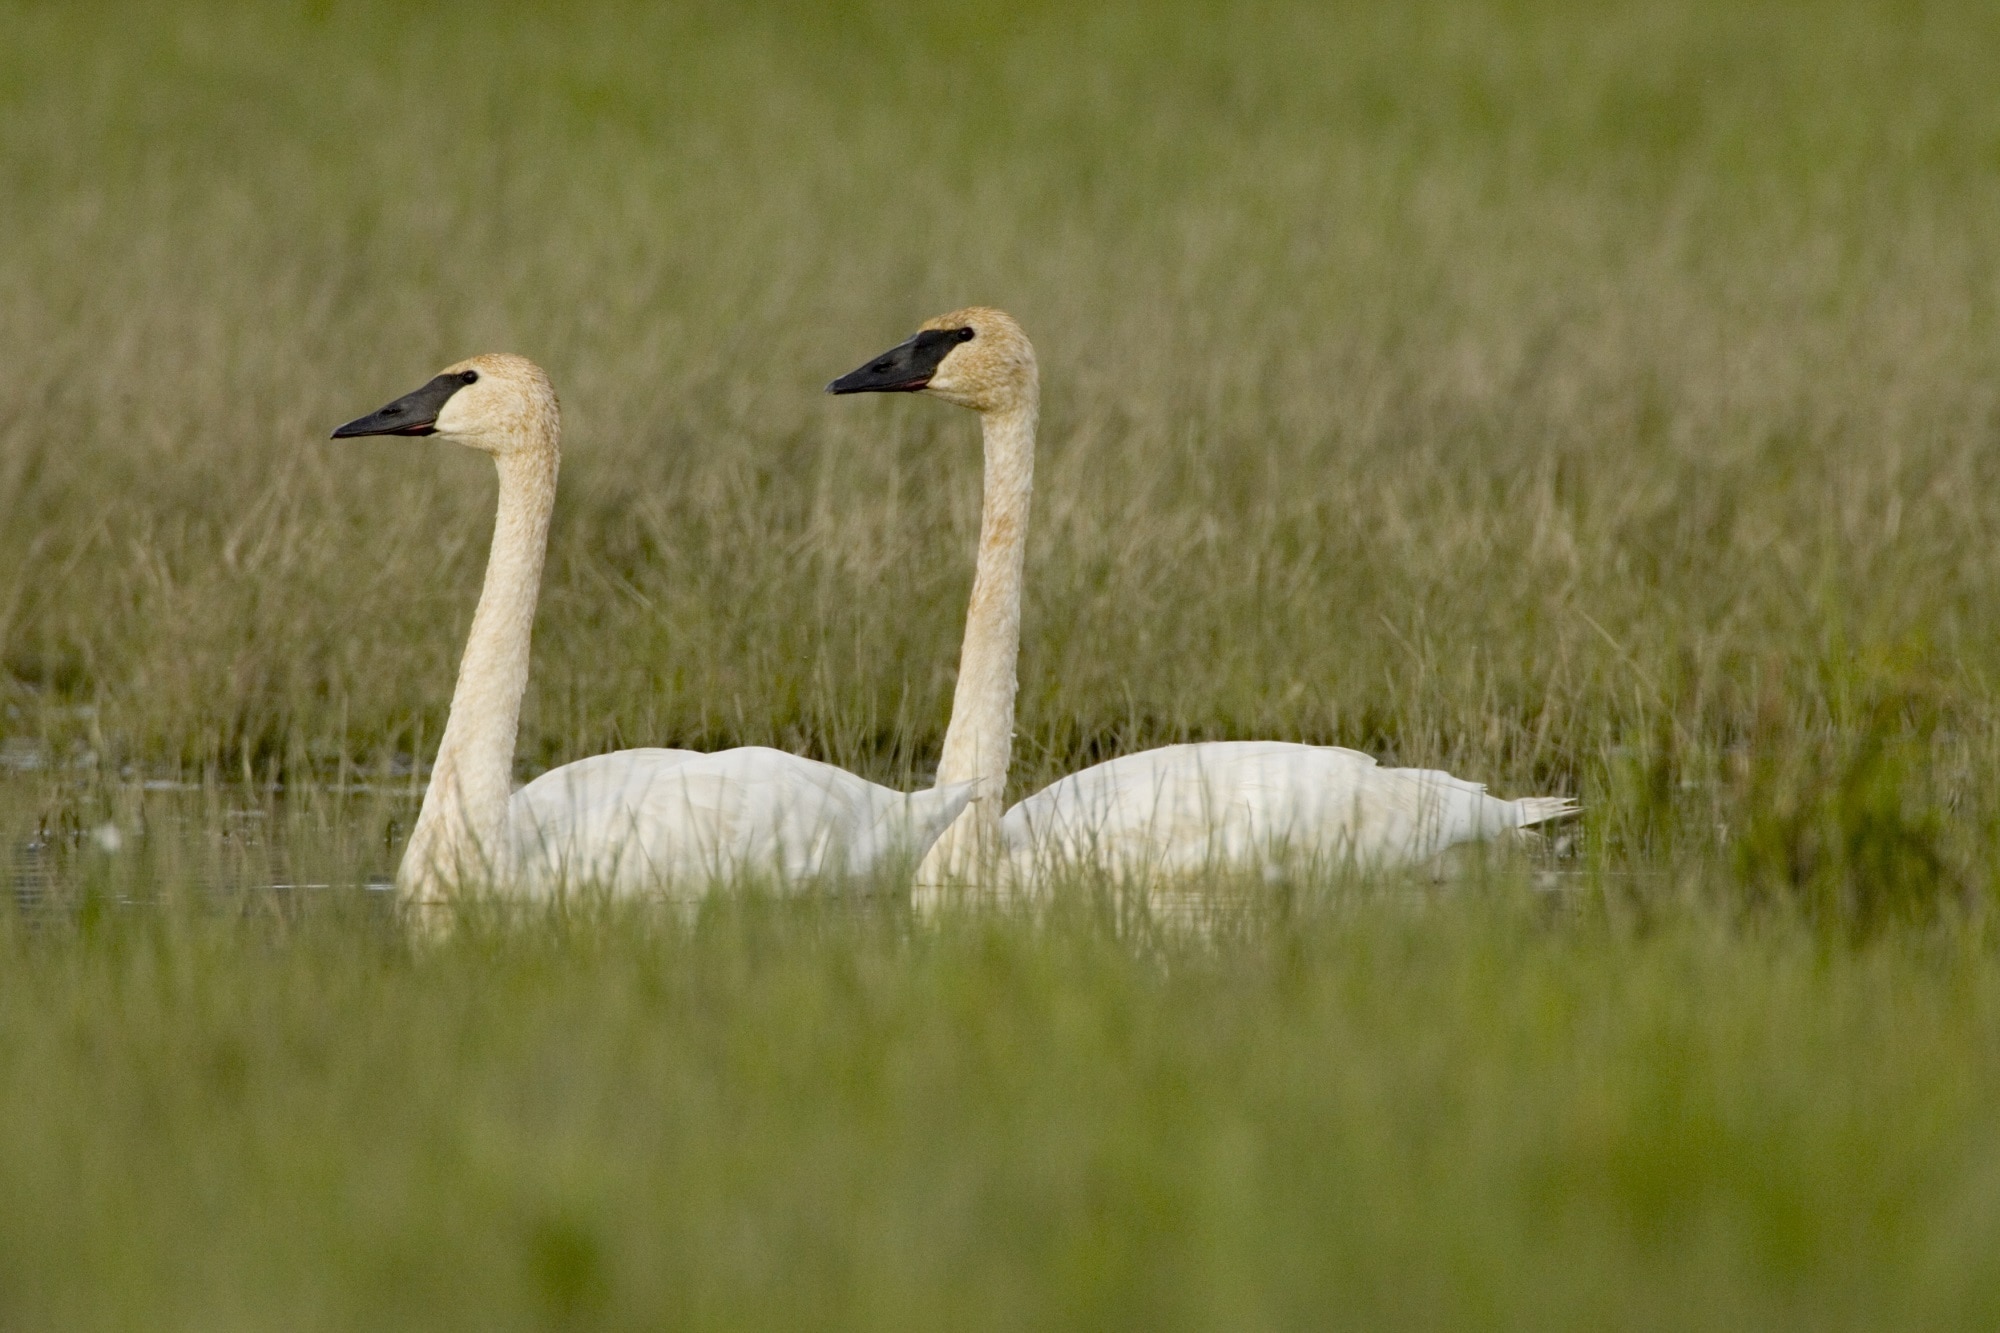 Trumpeter Swans, Nature, Birds, White, animals in the wild, animal themes